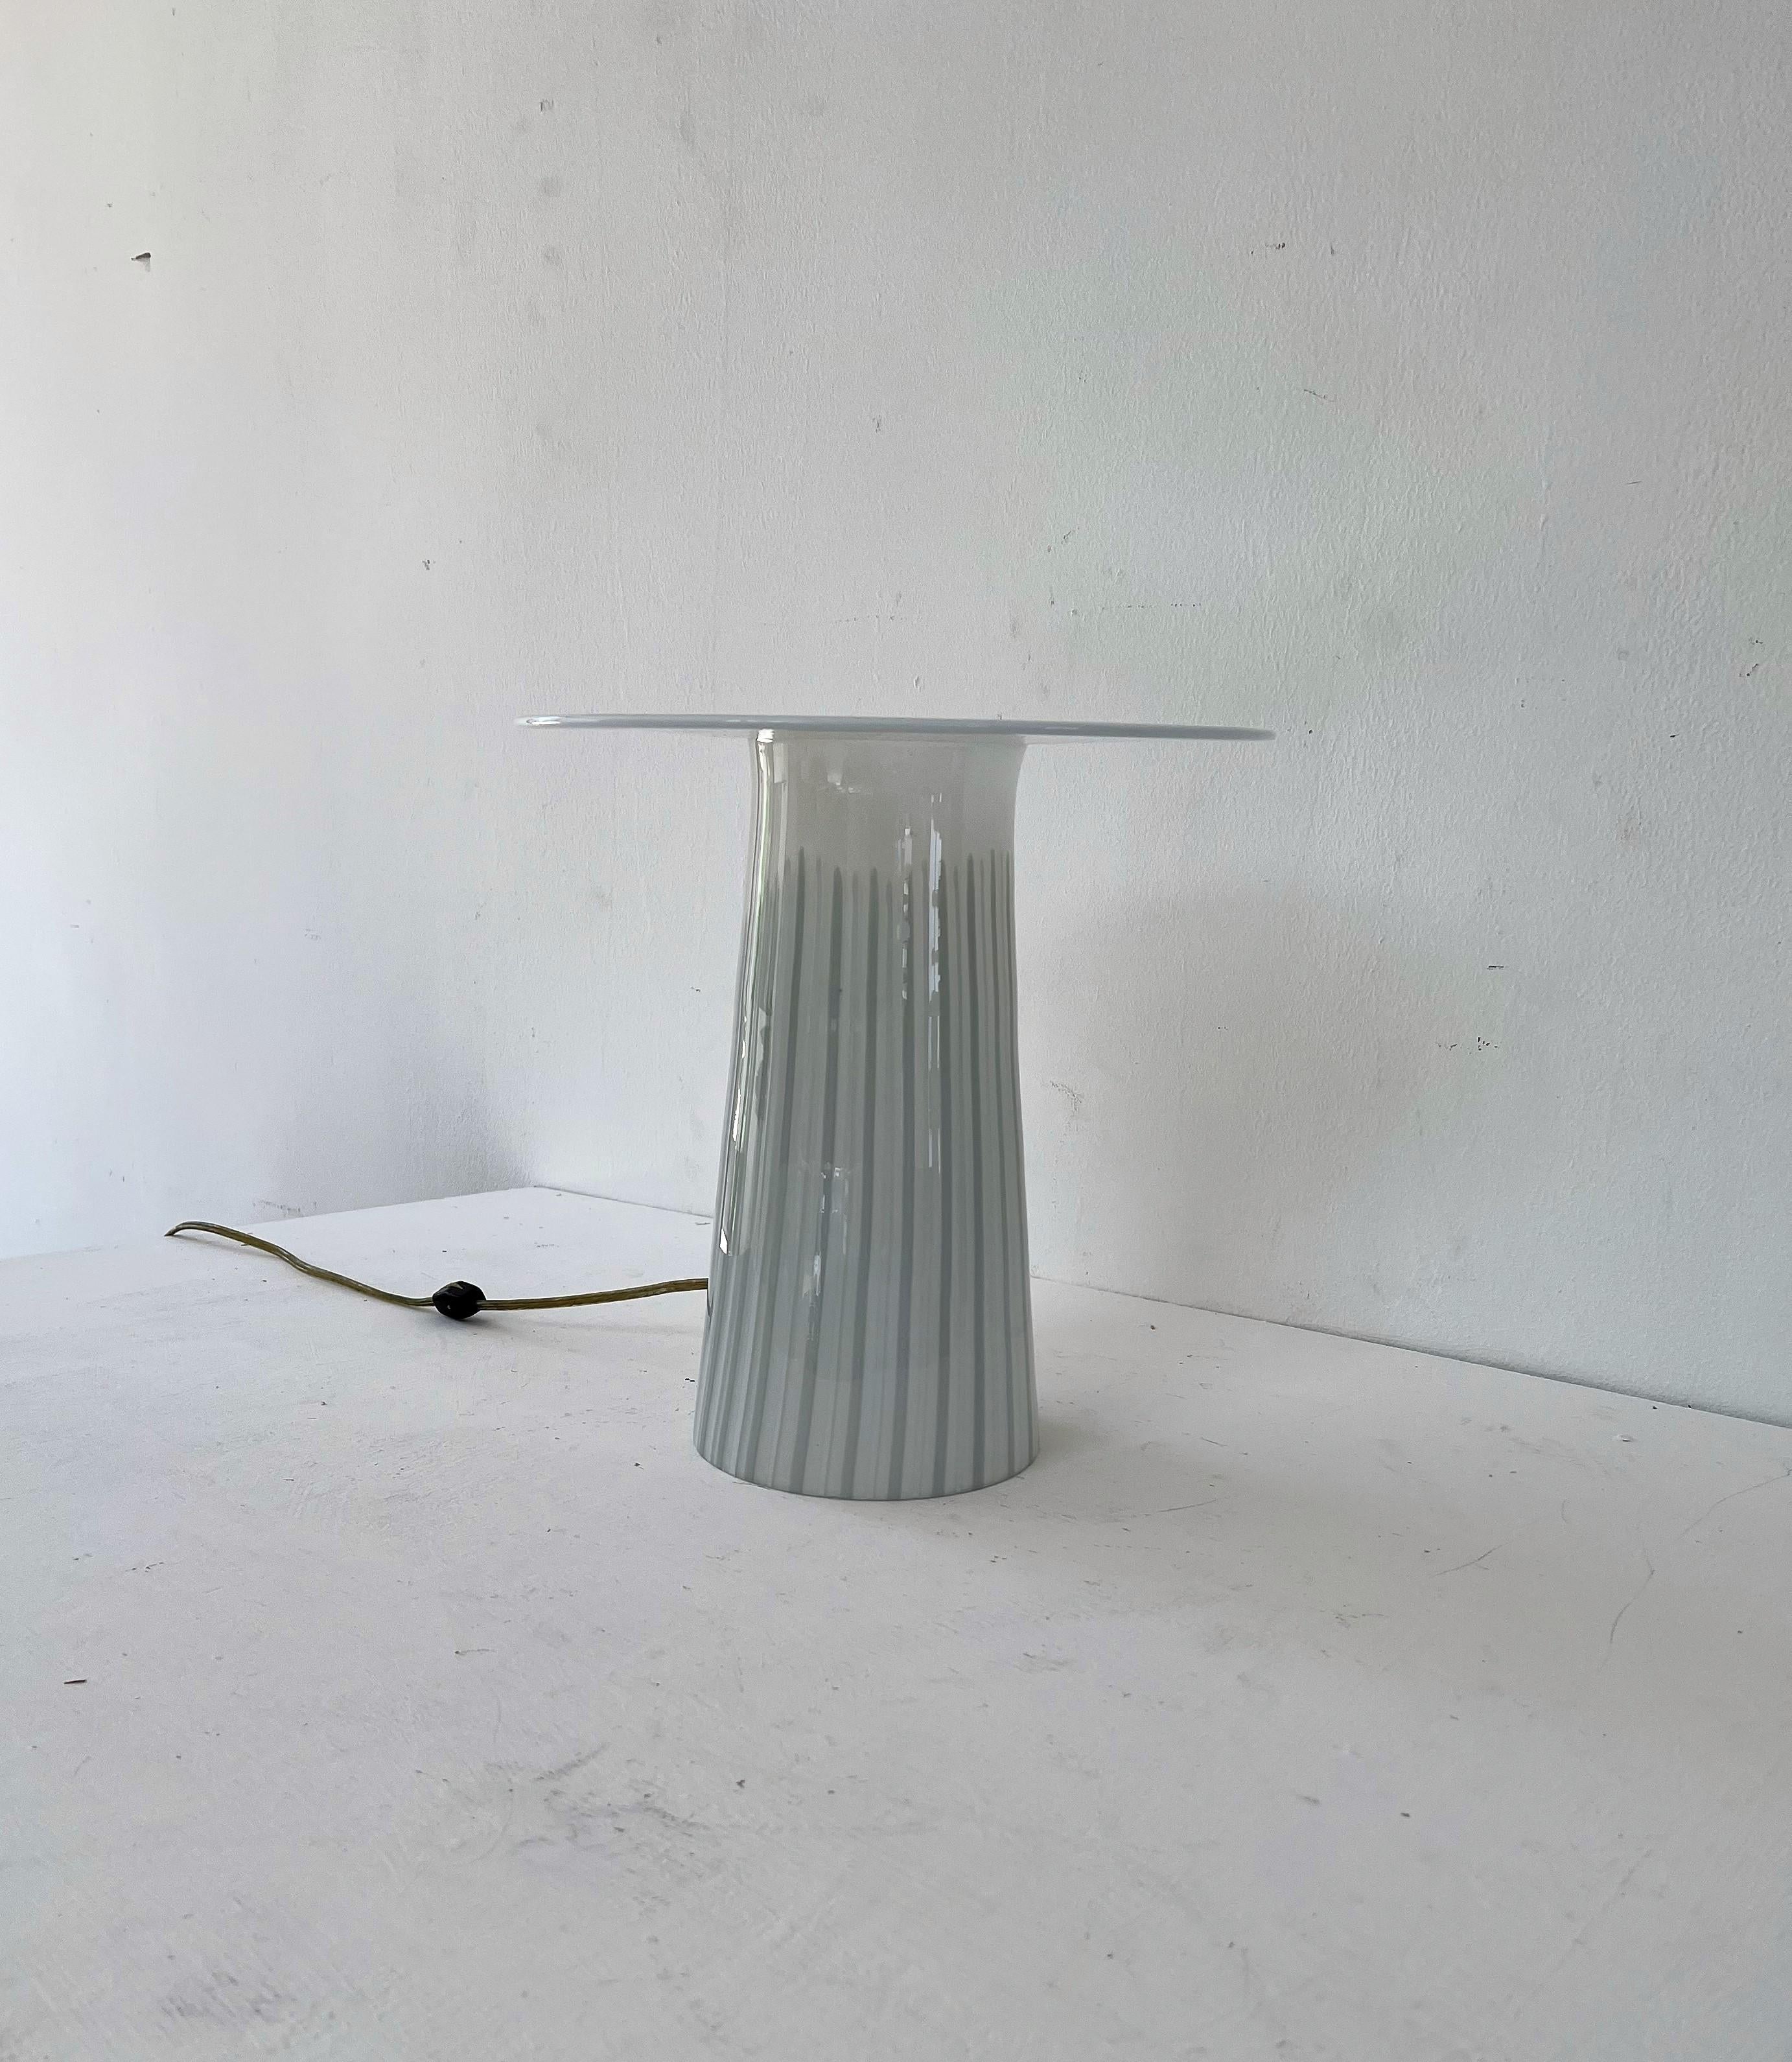 Mid-Century Modern Table Lamp in the Manner of Lino Tagliapietra, Murano 1970s For Sale 5